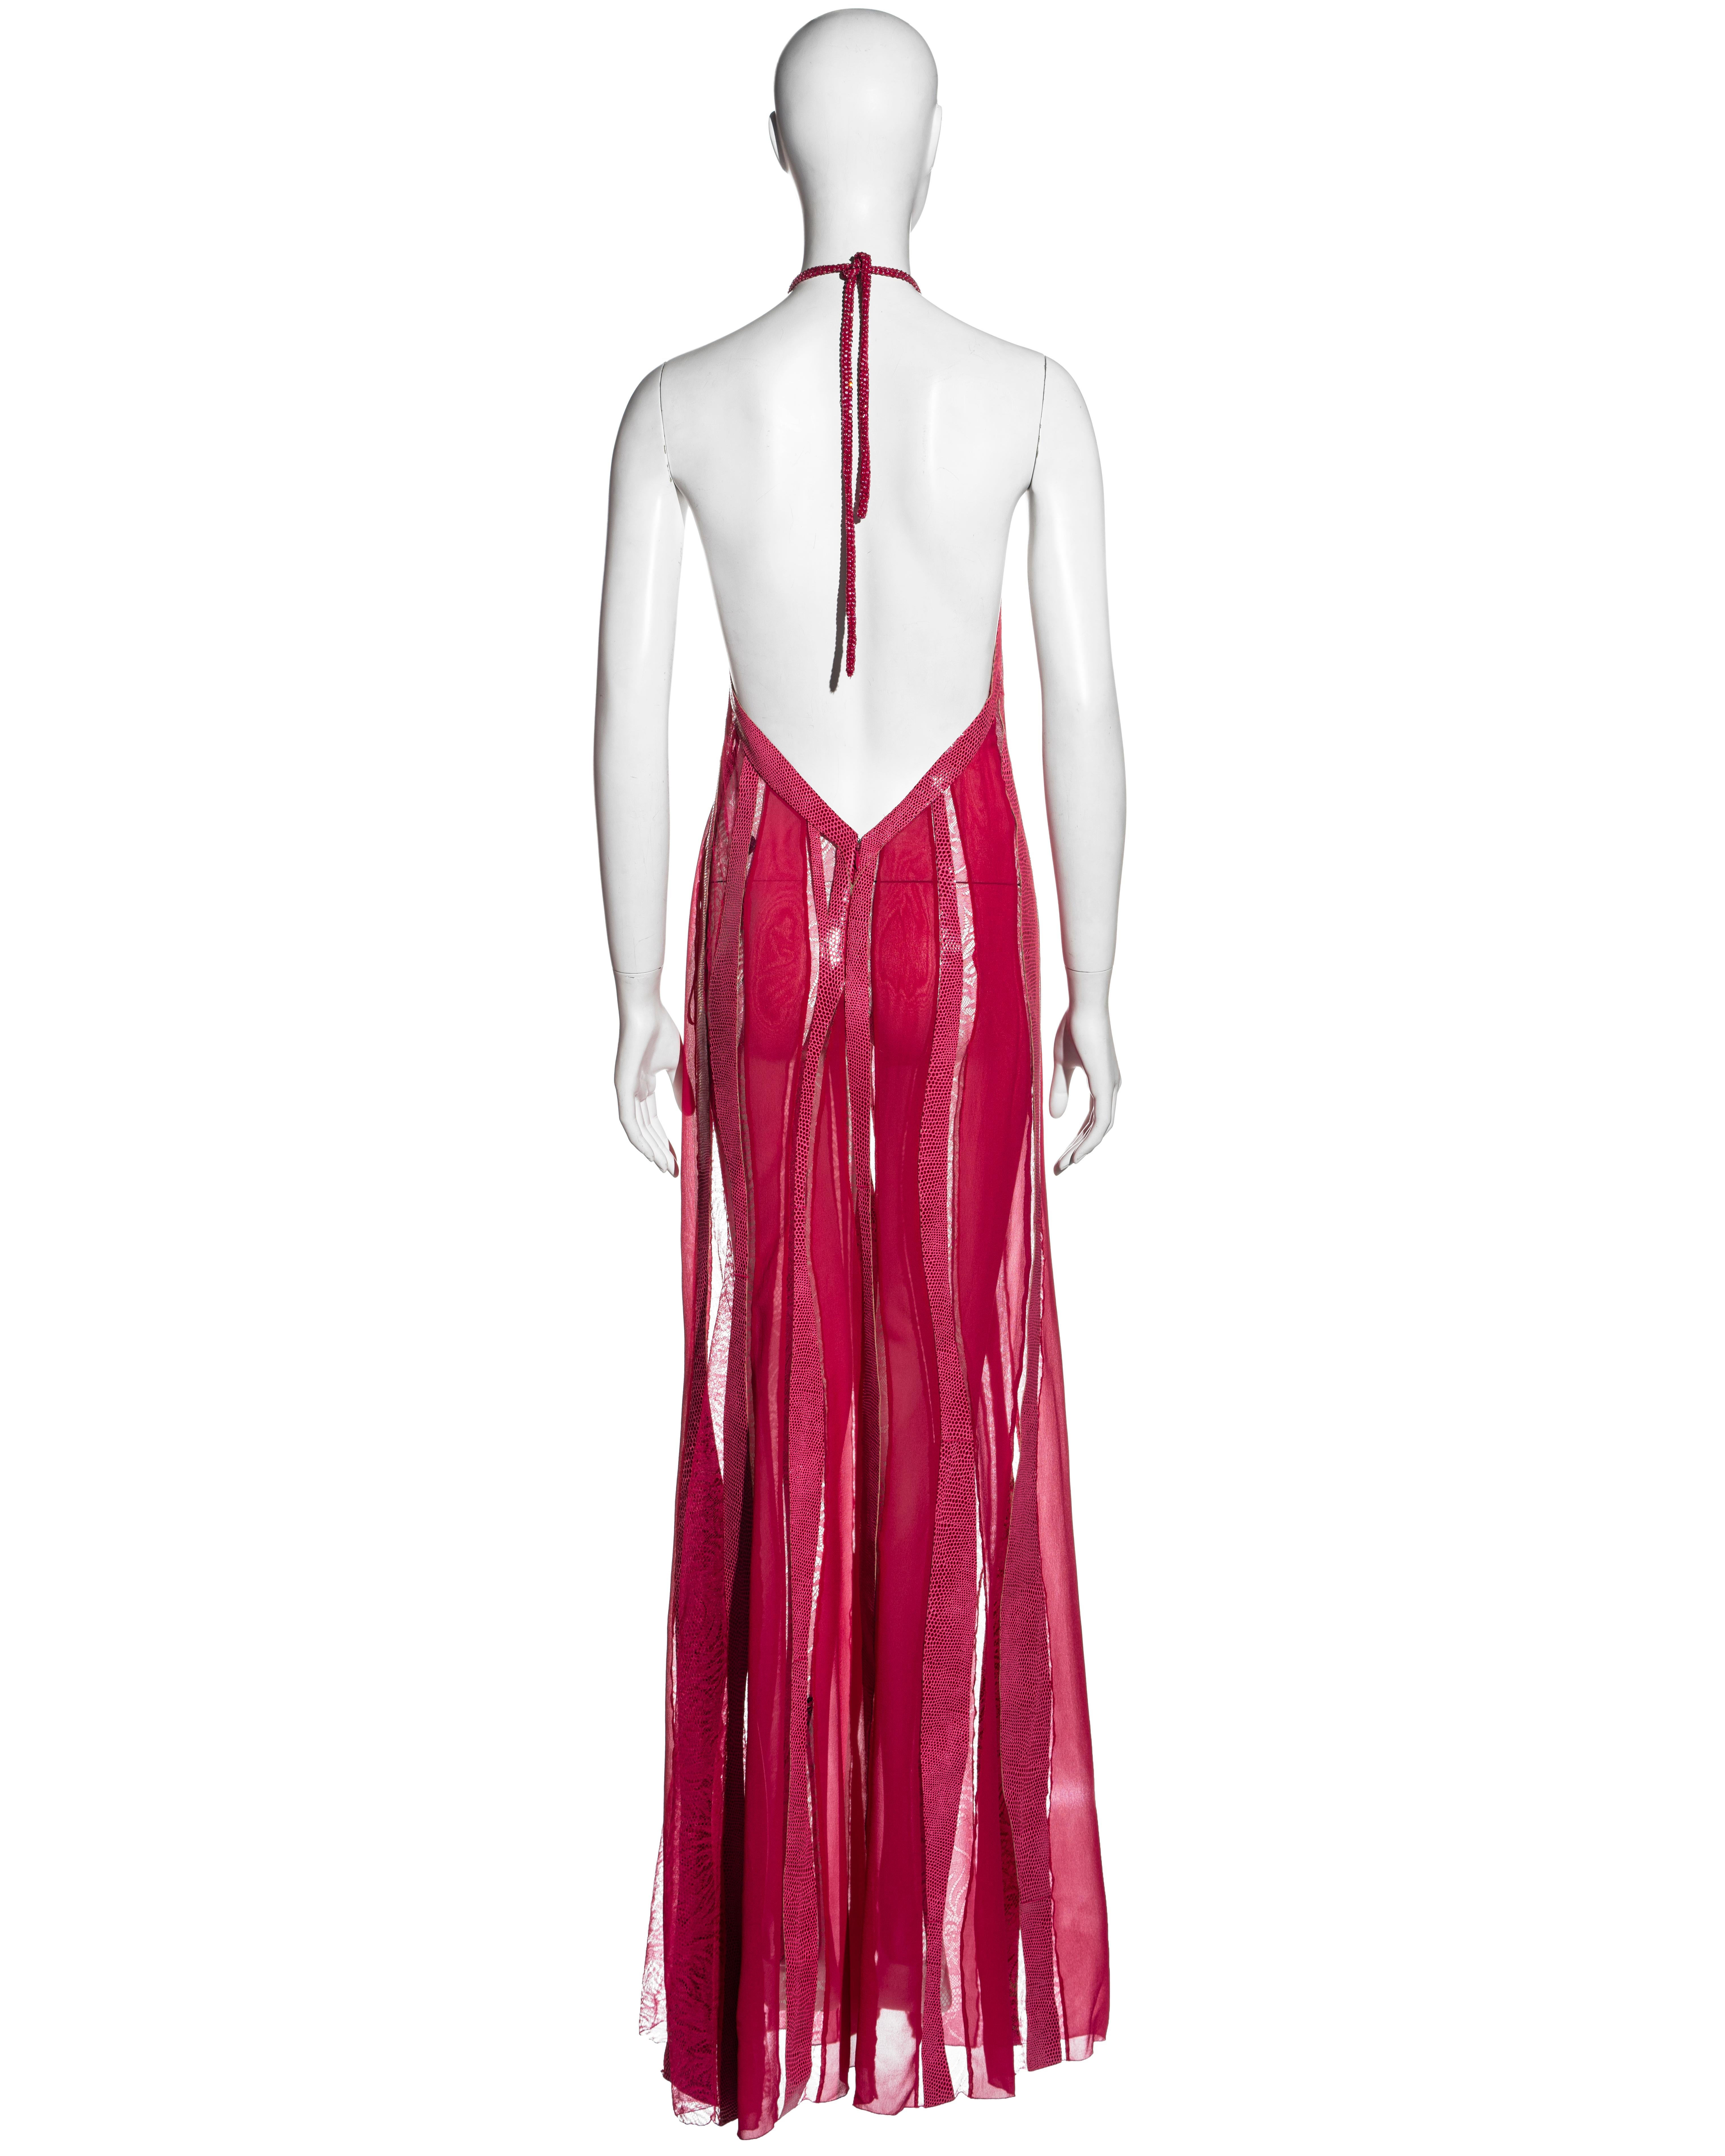 Gianni Versace pink silk, leather and lace halter neck maxi dress, fw 2000 For Sale 5